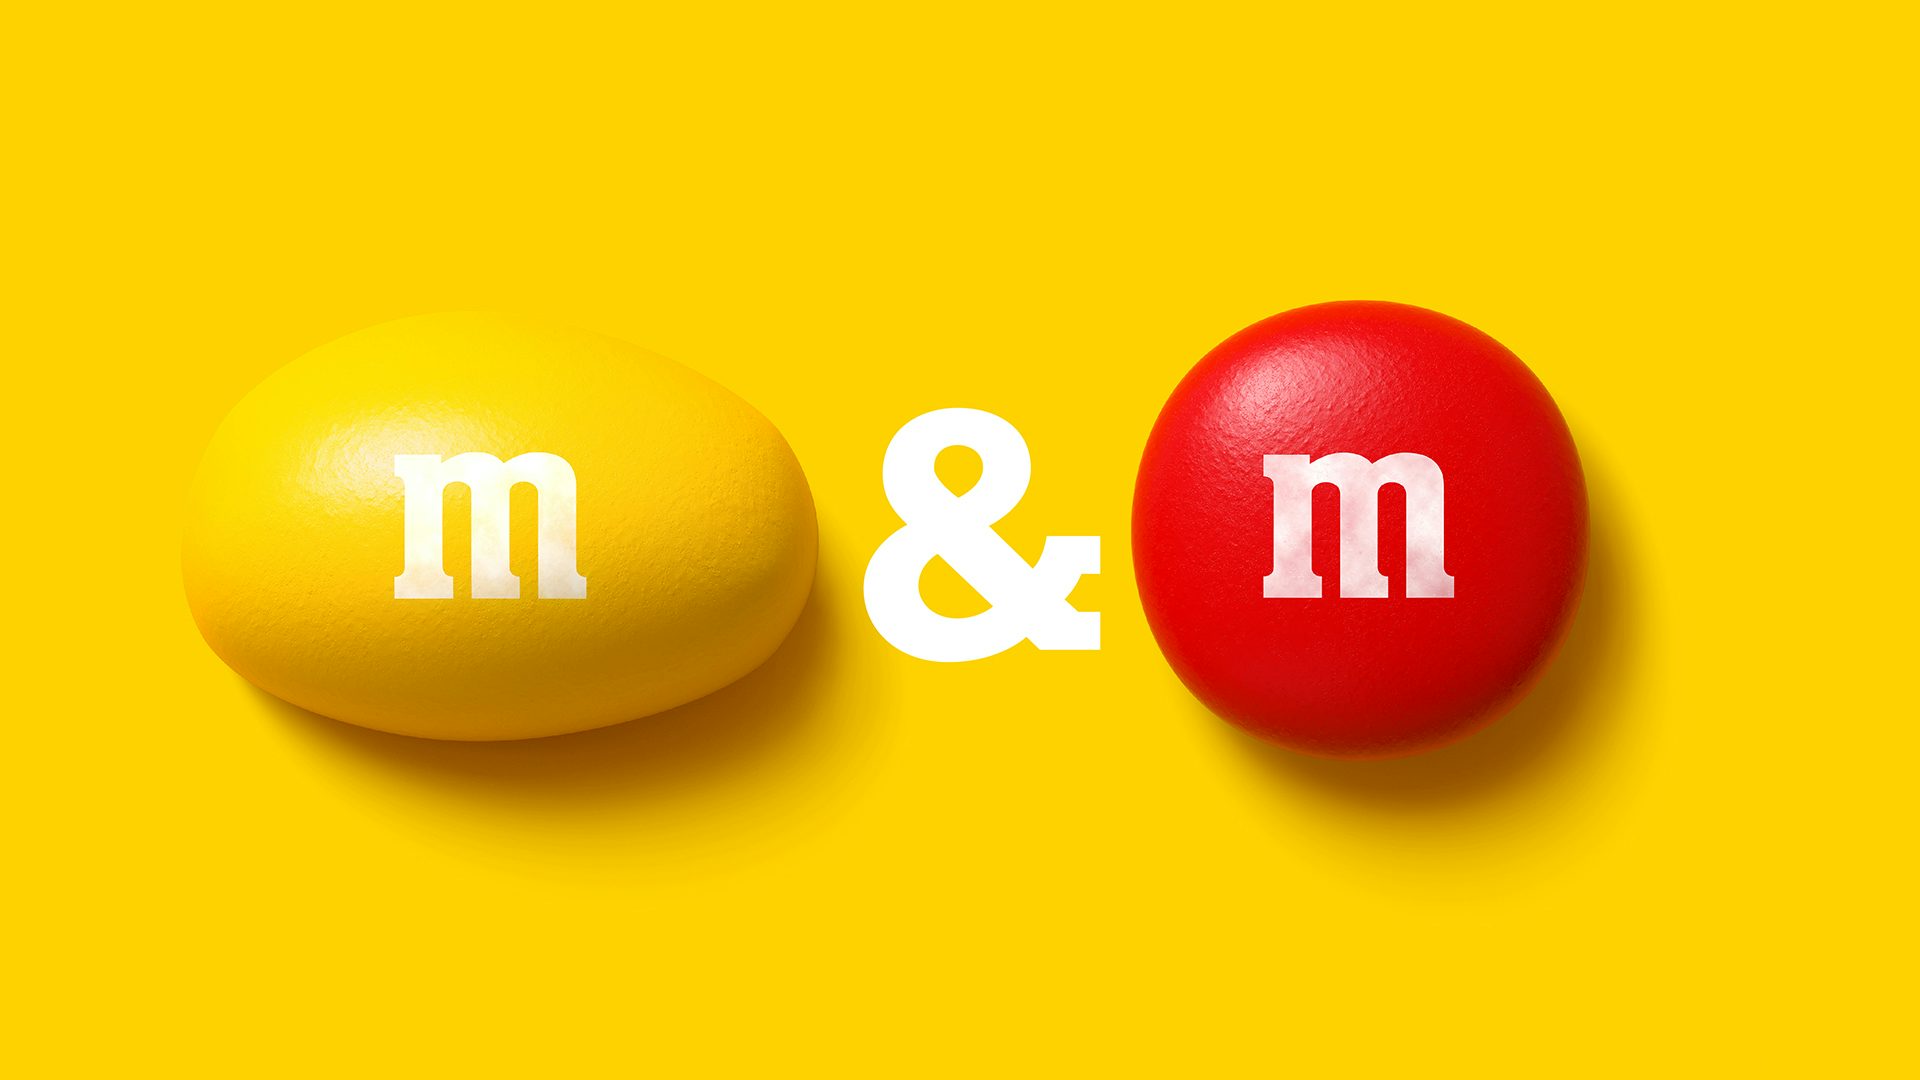 M&M's logo and their history